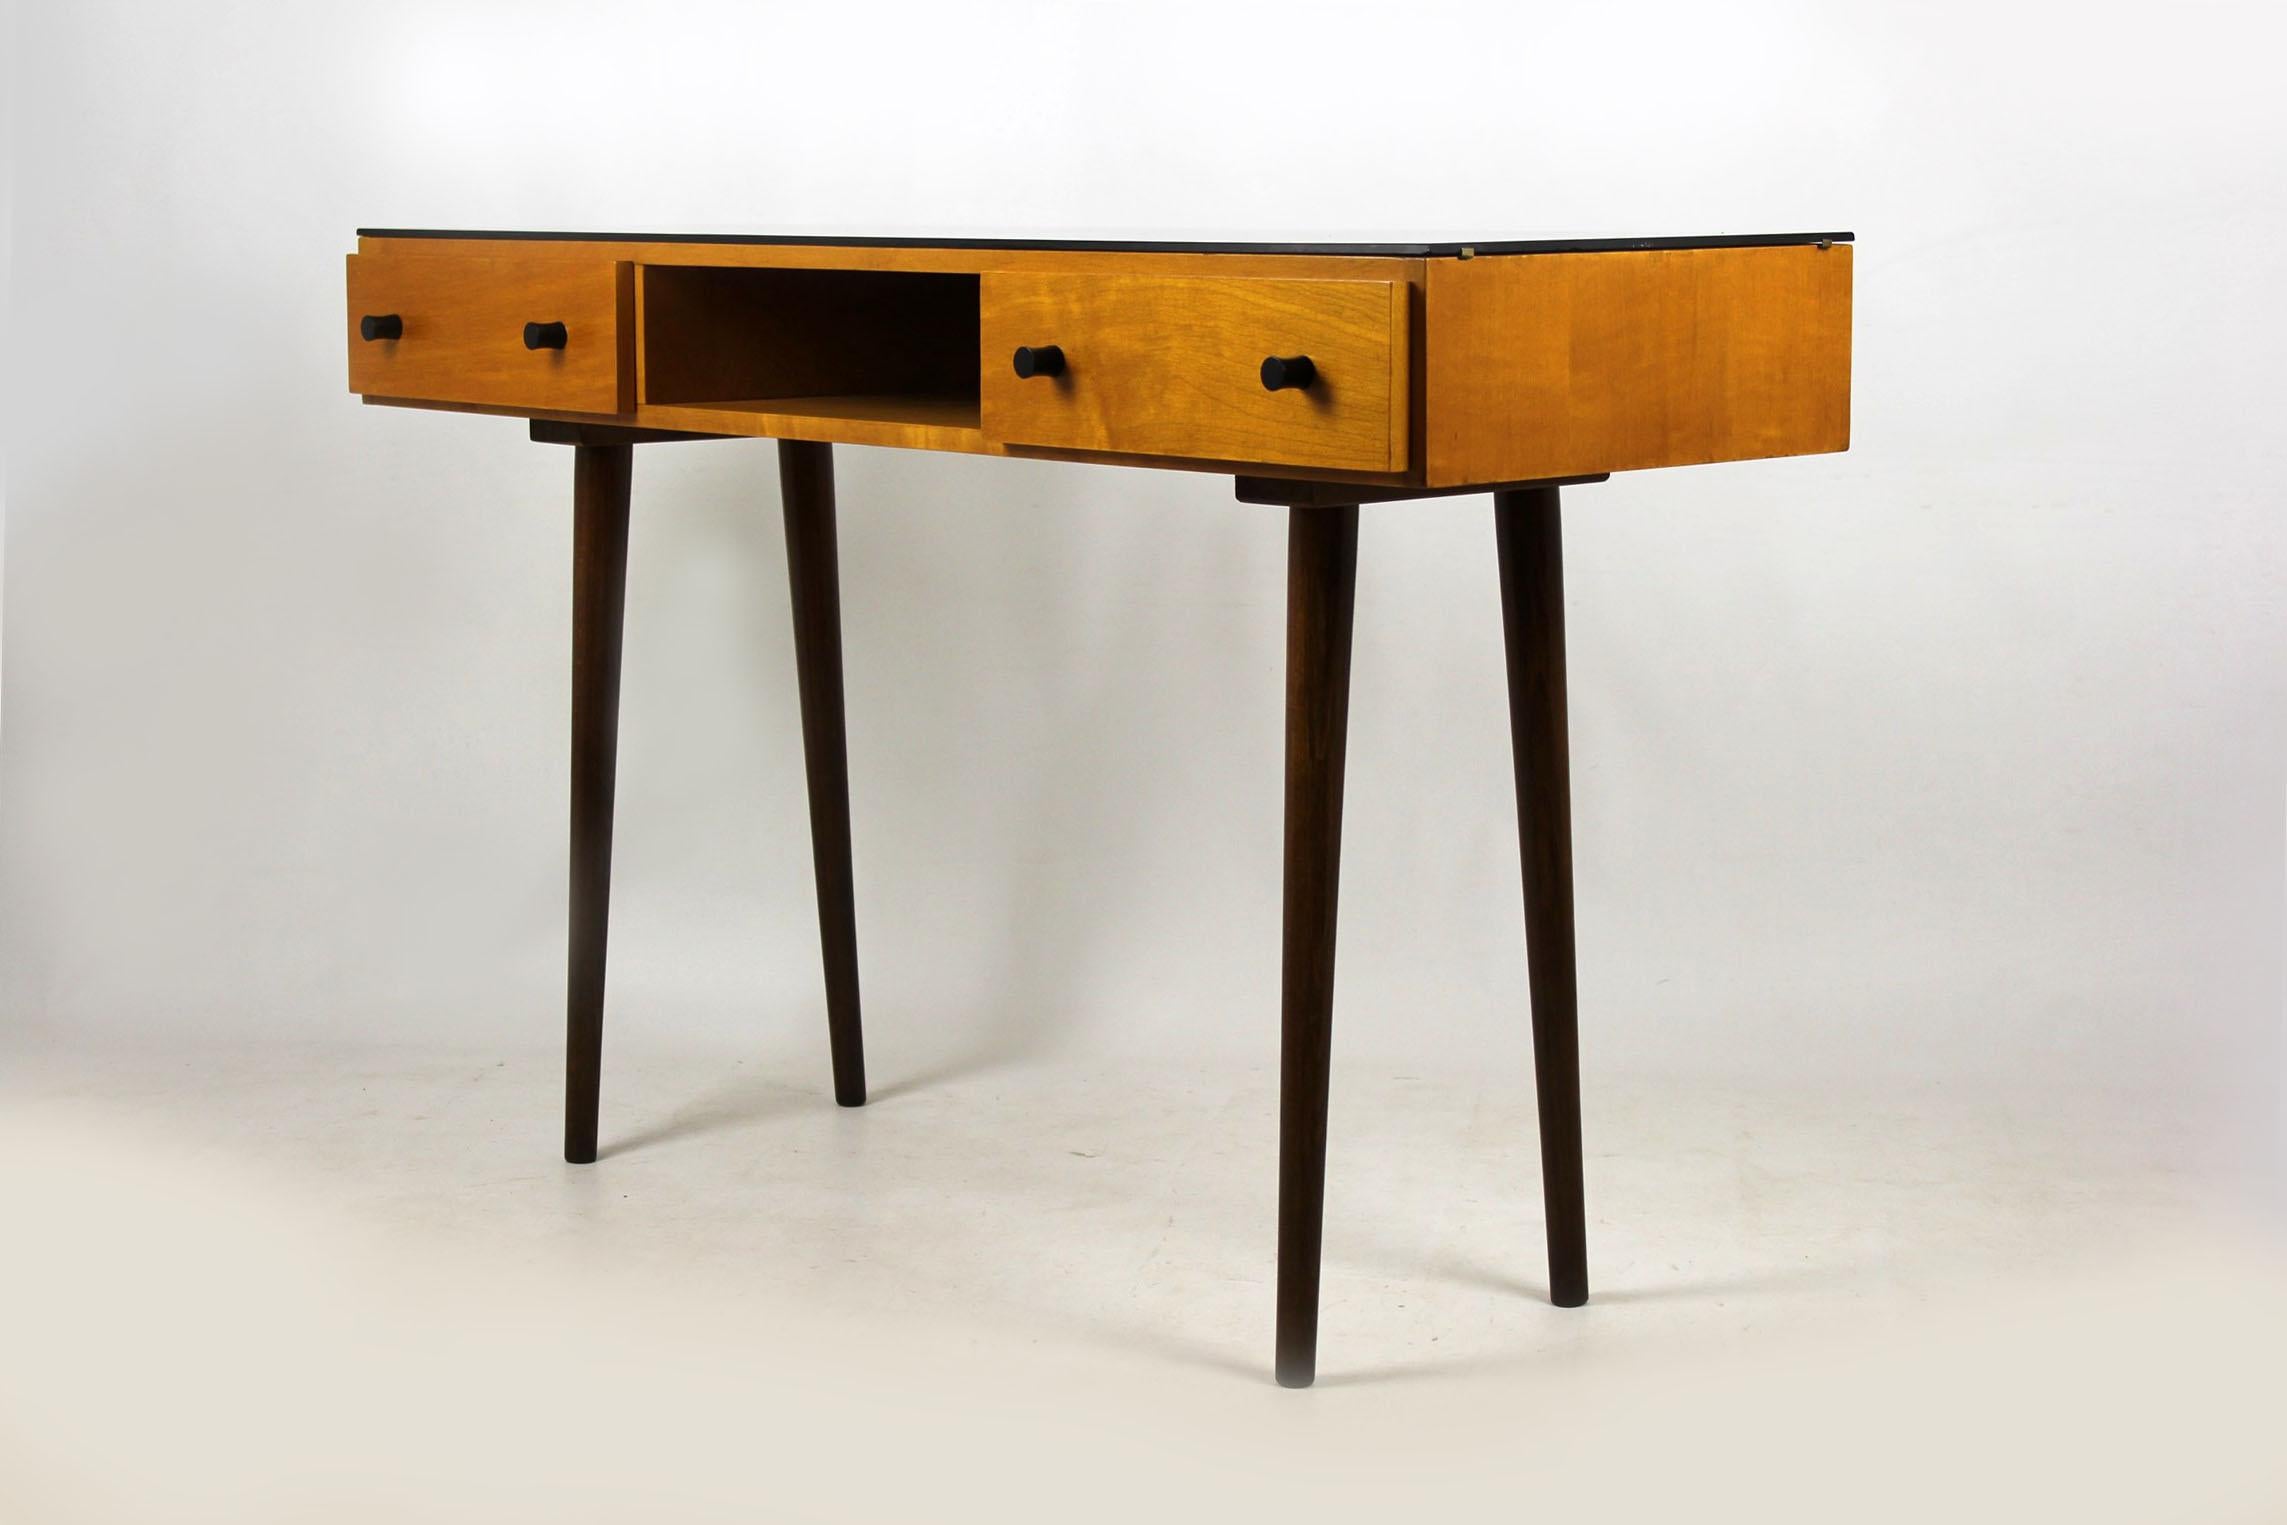 20th Century Midcentury Desk or Console Table by M. Požár for Up Bučovice, 1960s